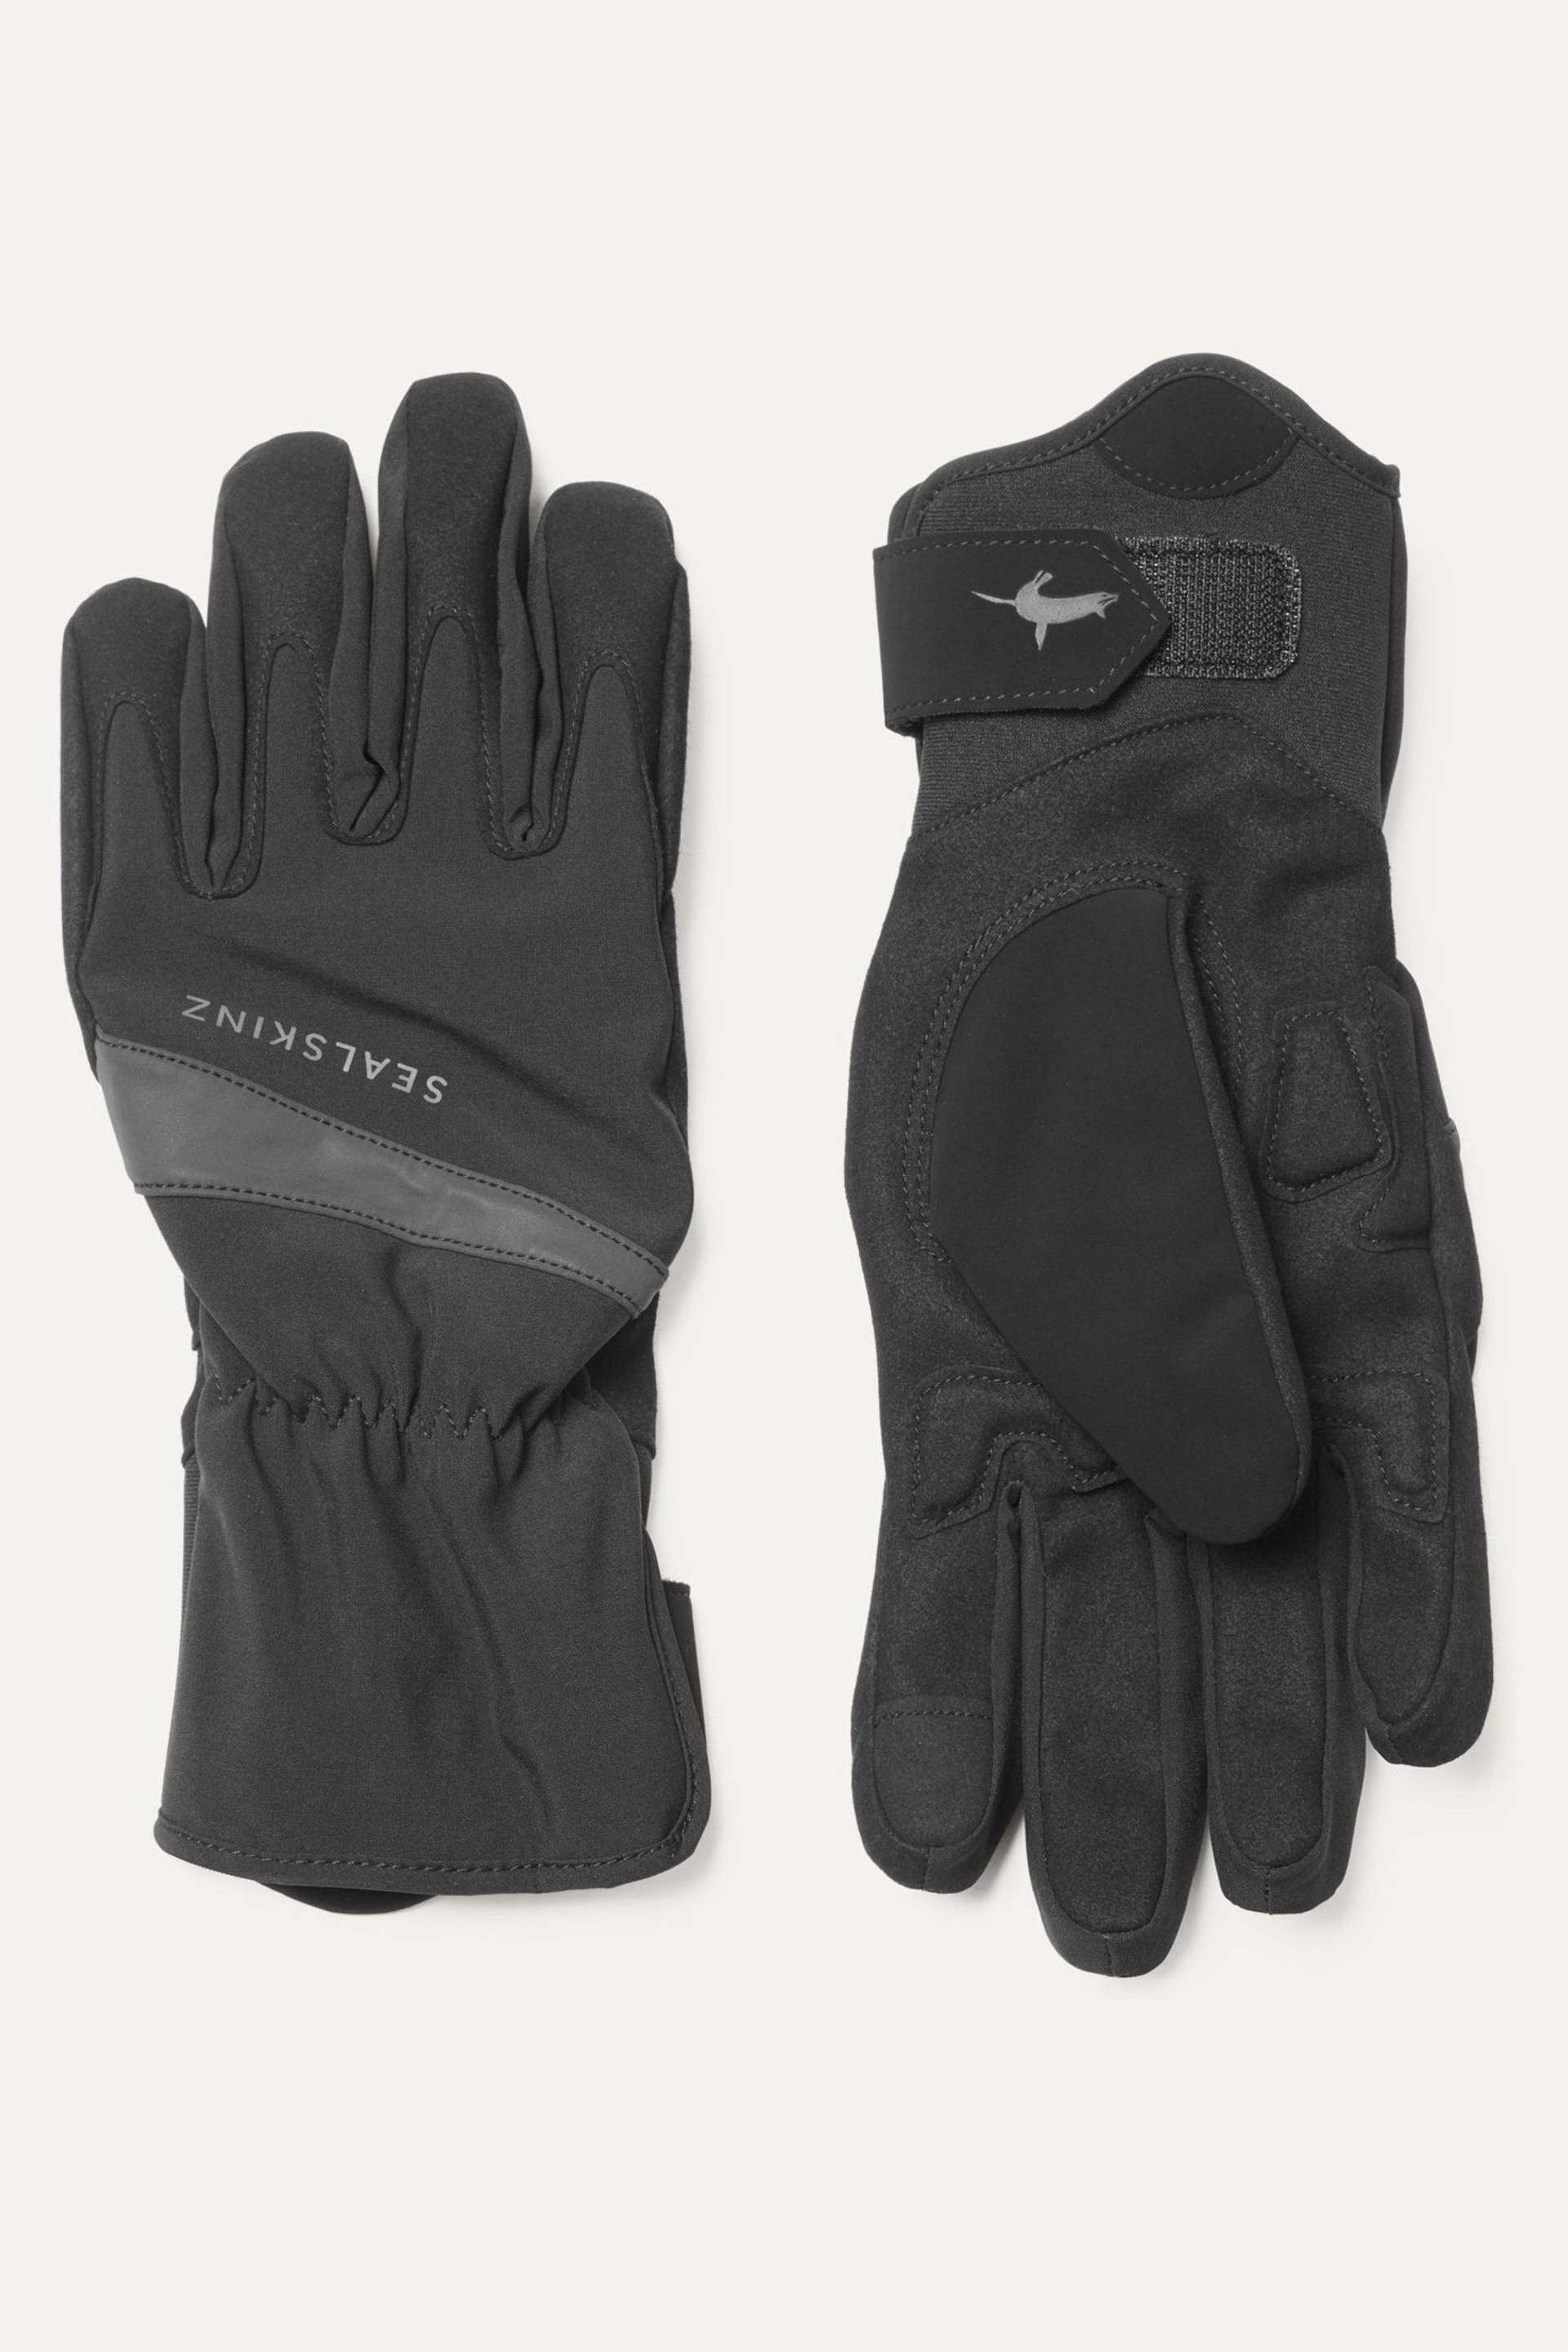 Sealskinz Bodham Women{Sq}S Black Waterproof All Weather Cycle Gloves - Image 1 of 3